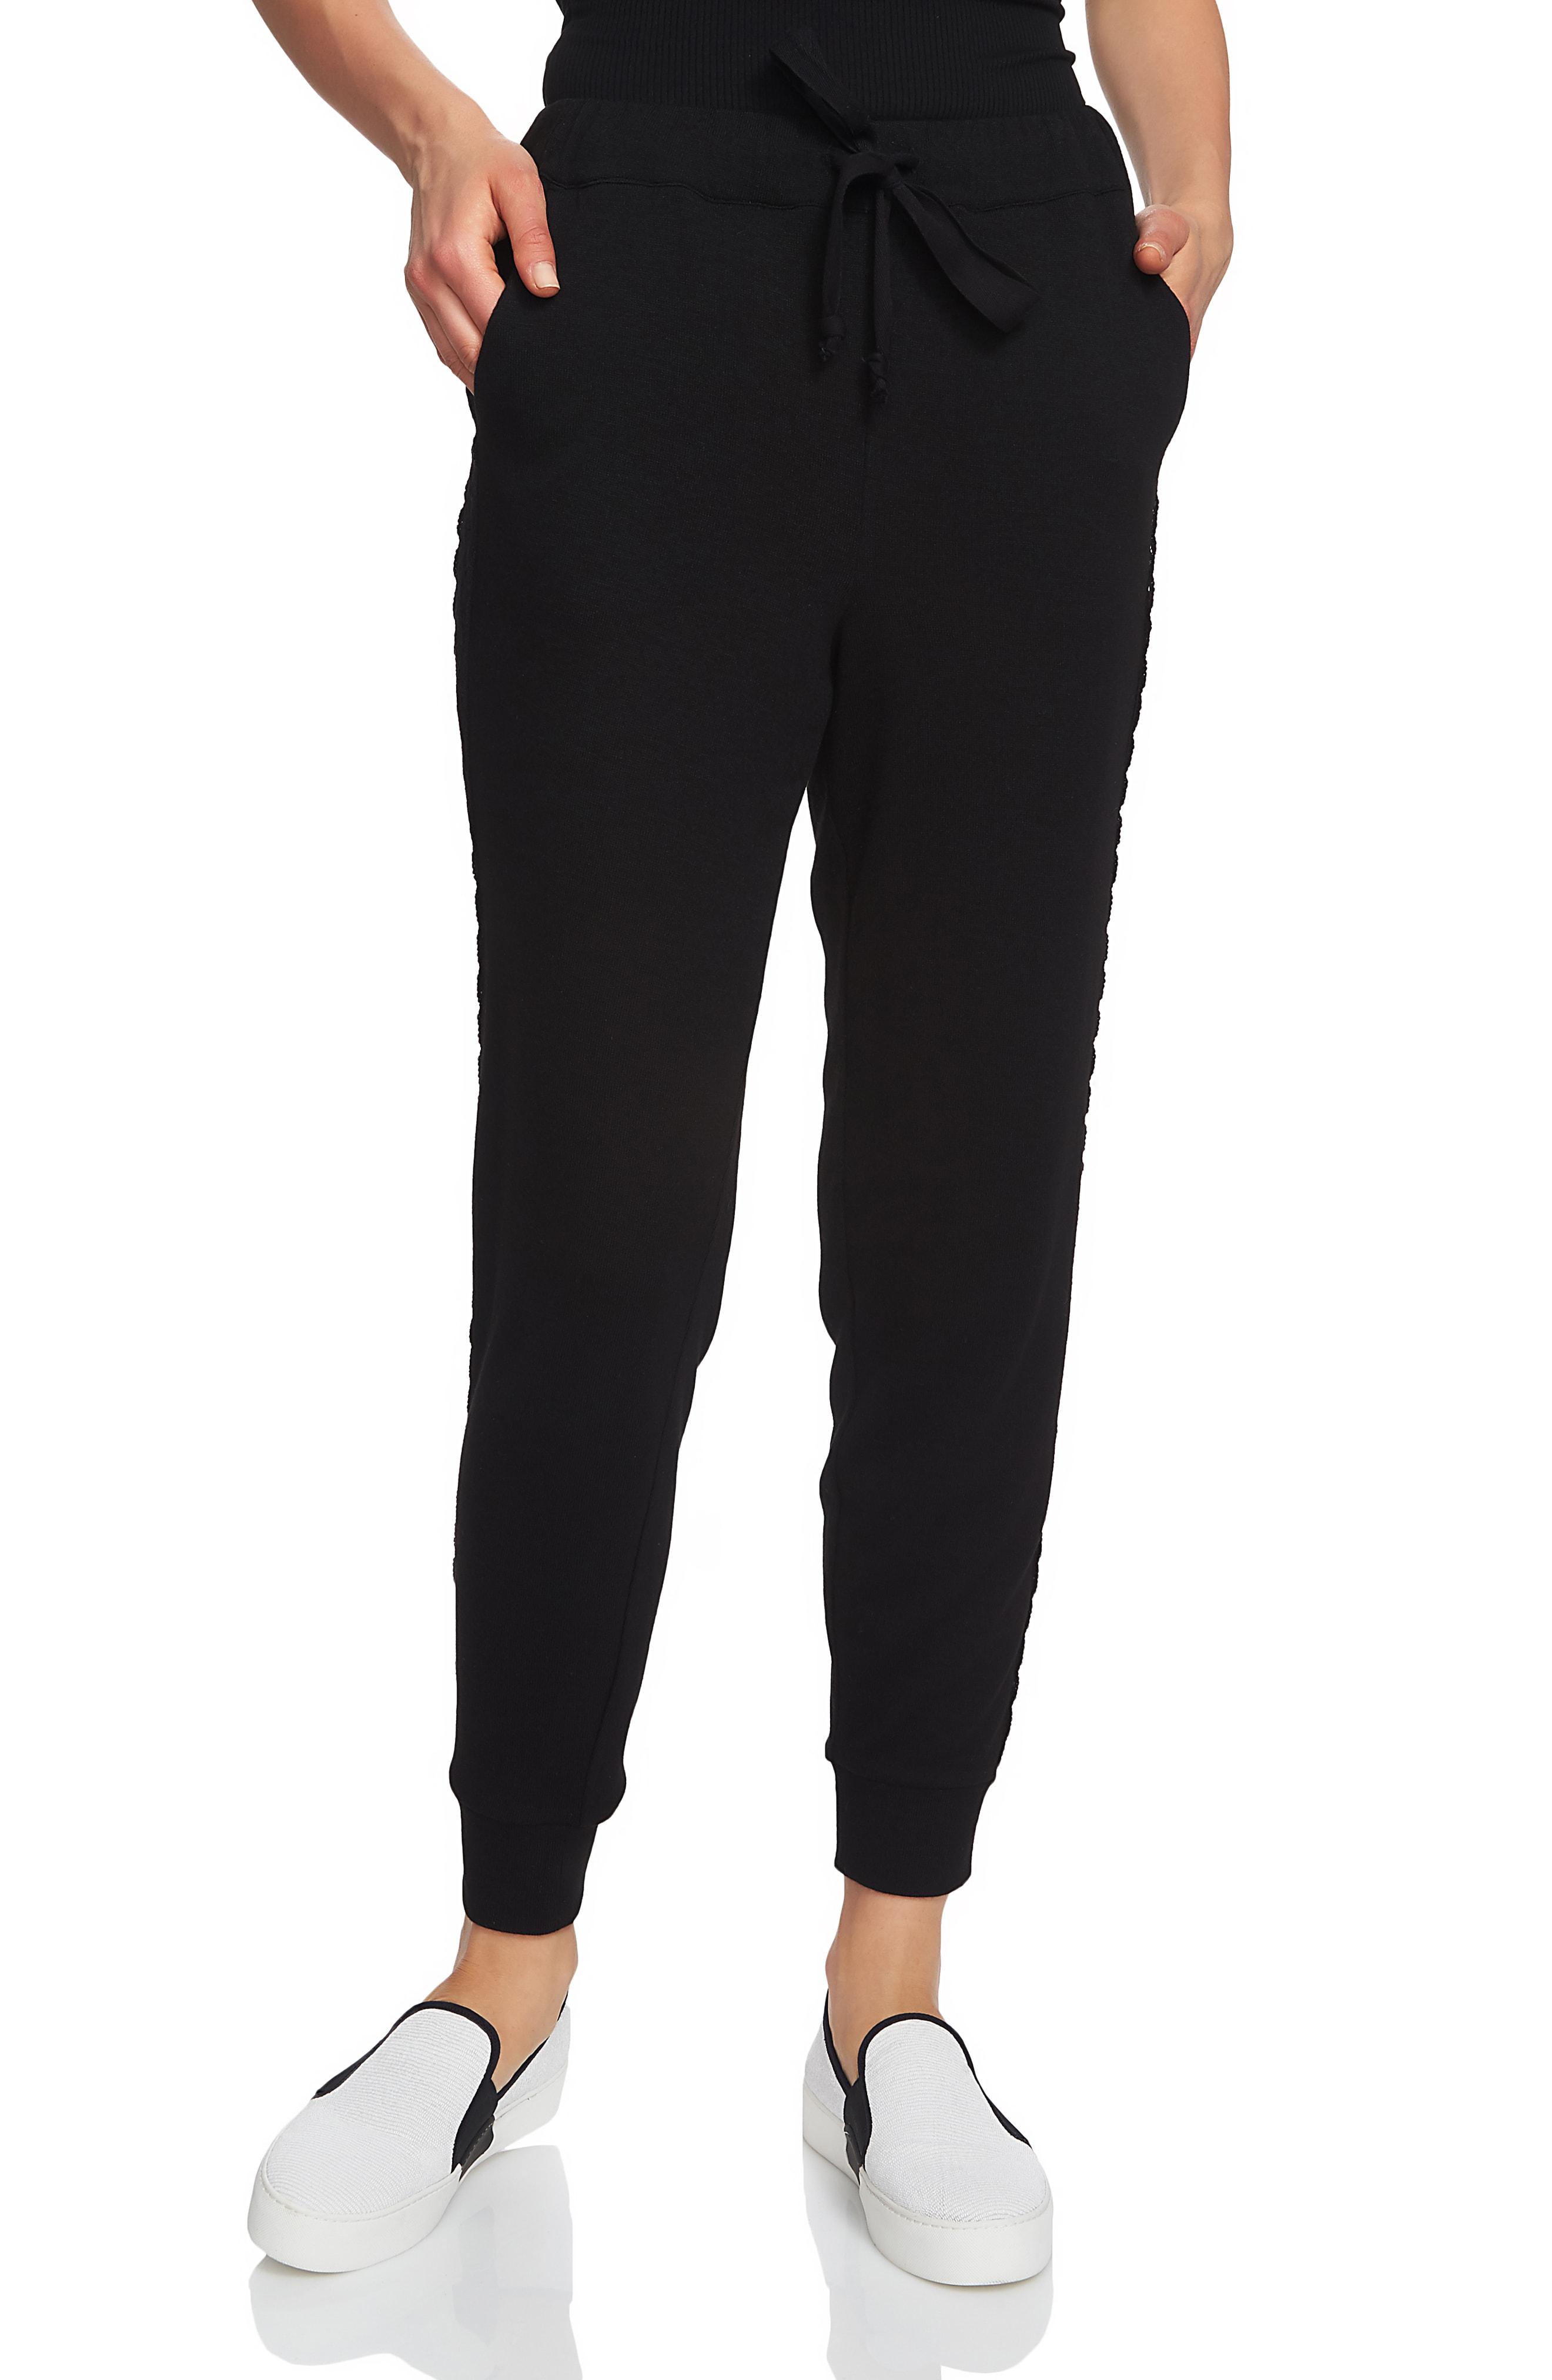 Lyst - 1.State Cozy Knit High Waist Jogger Pants in Black